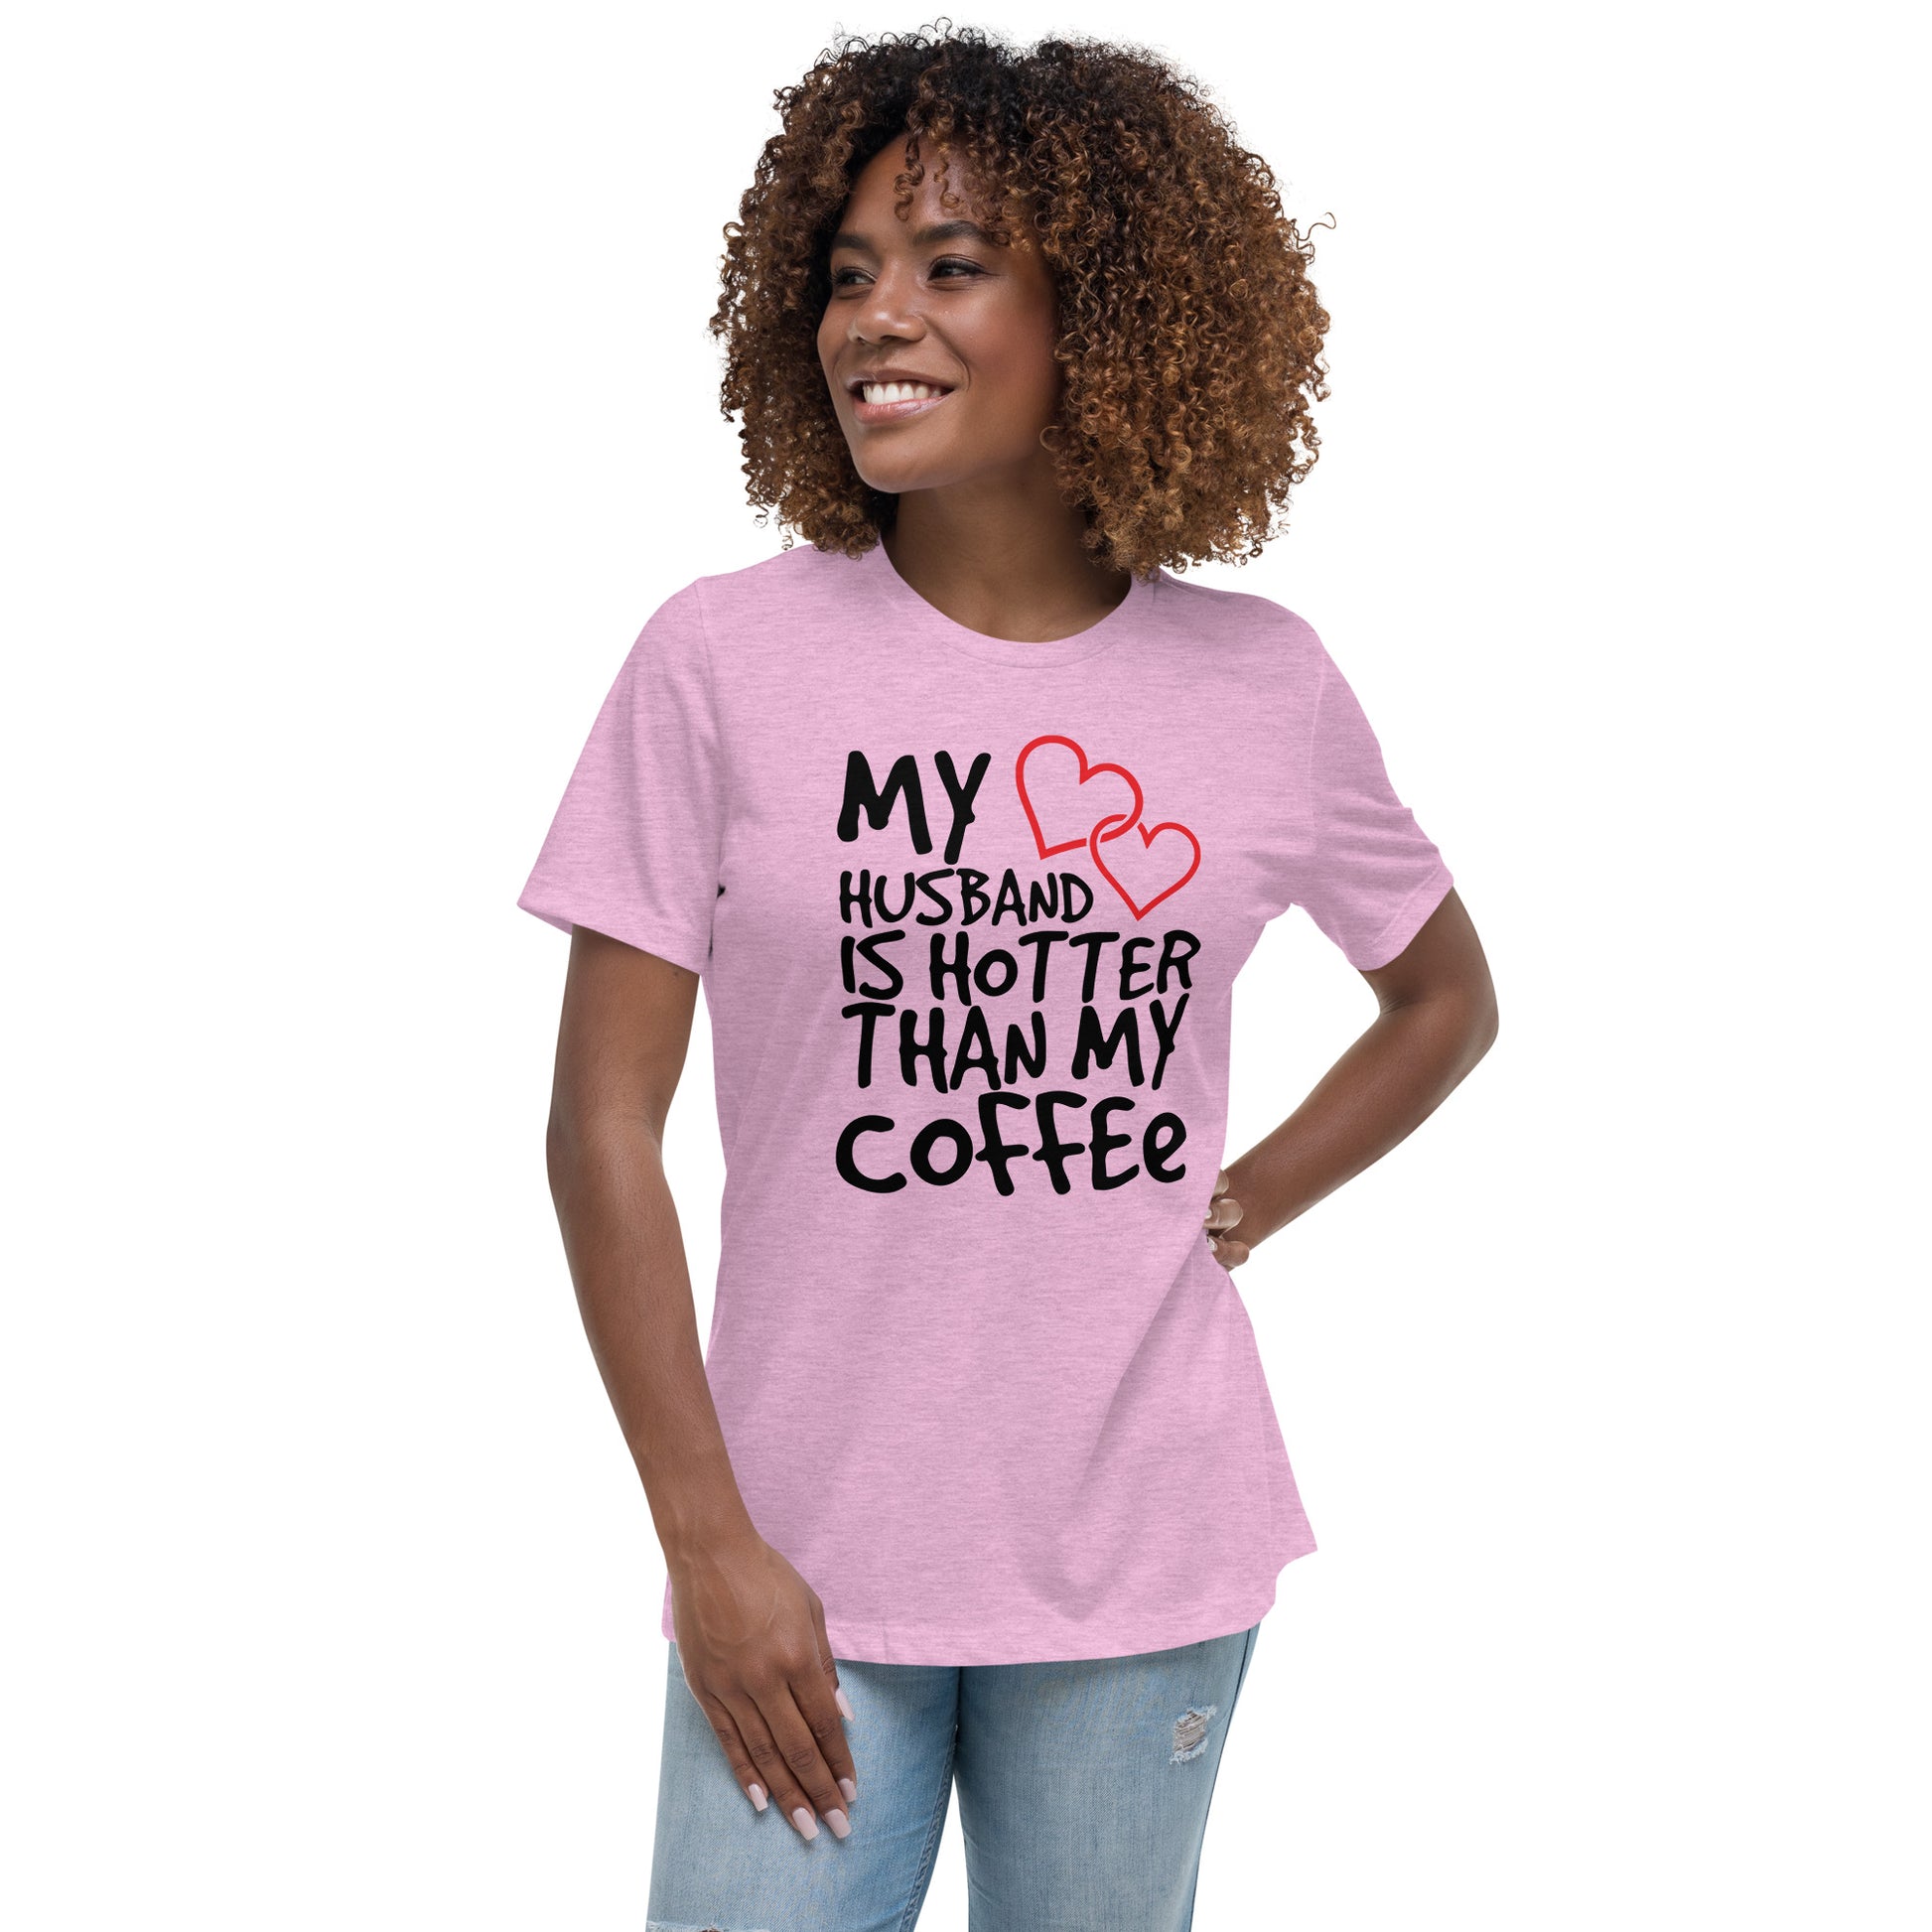 My Husband is Hotter Than My Coffee Women's Relaxed T-Shirt Tee Tshirt